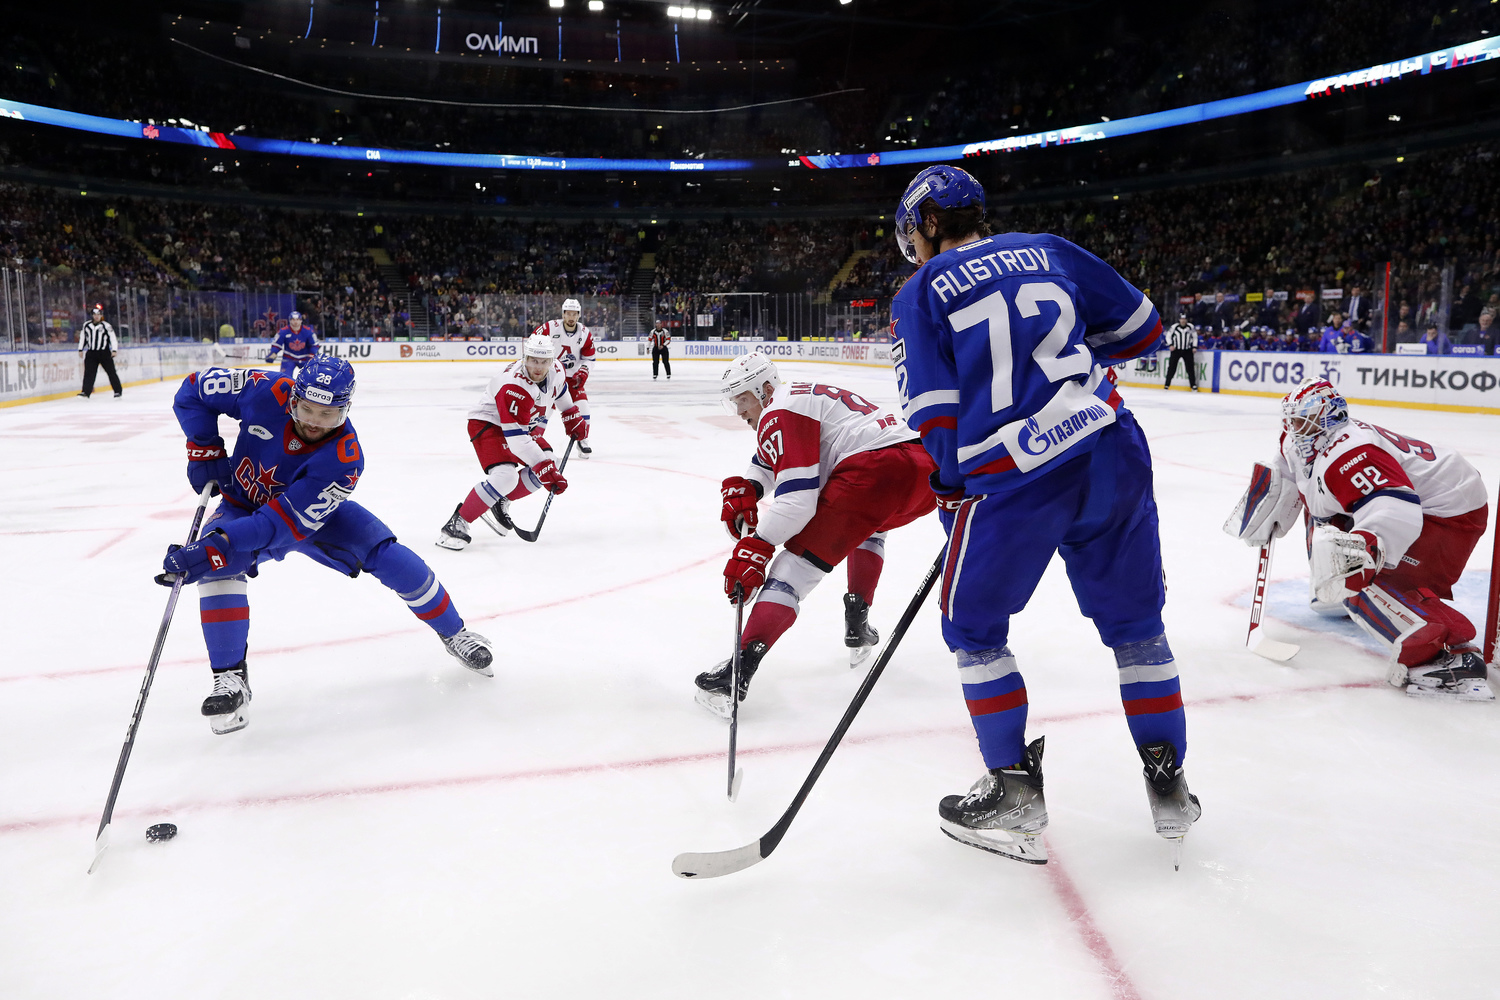 SKA-Lokomotiv: how the hot hockey match went with a disappointing score of 2:3